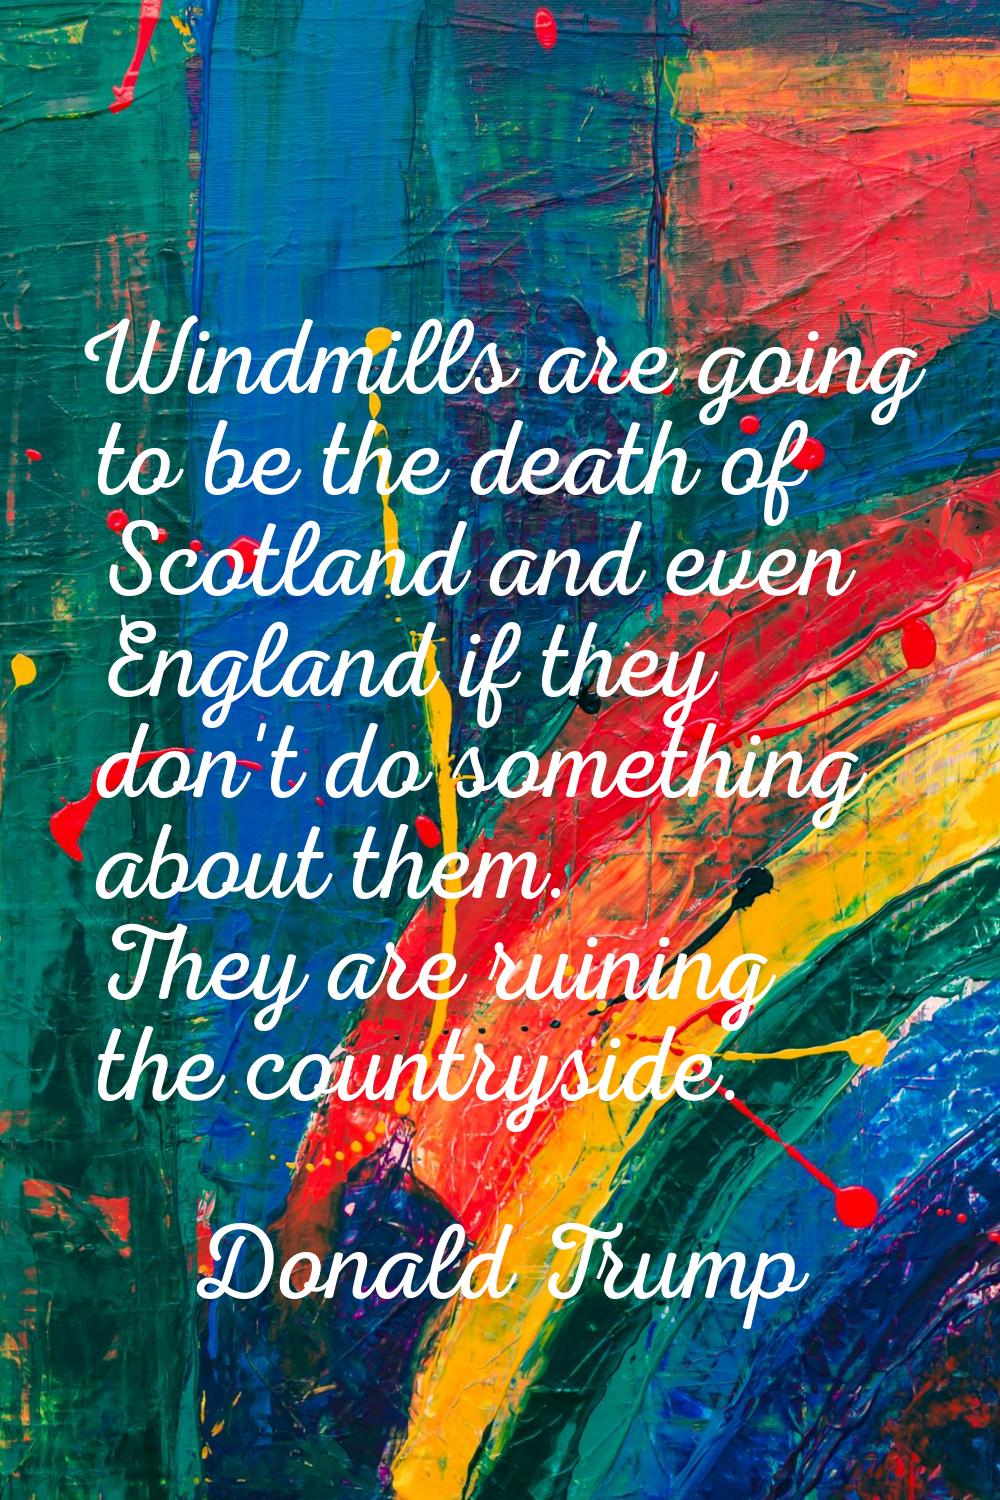 Windmills are going to be the death of Scotland and even England if they don't do something about t